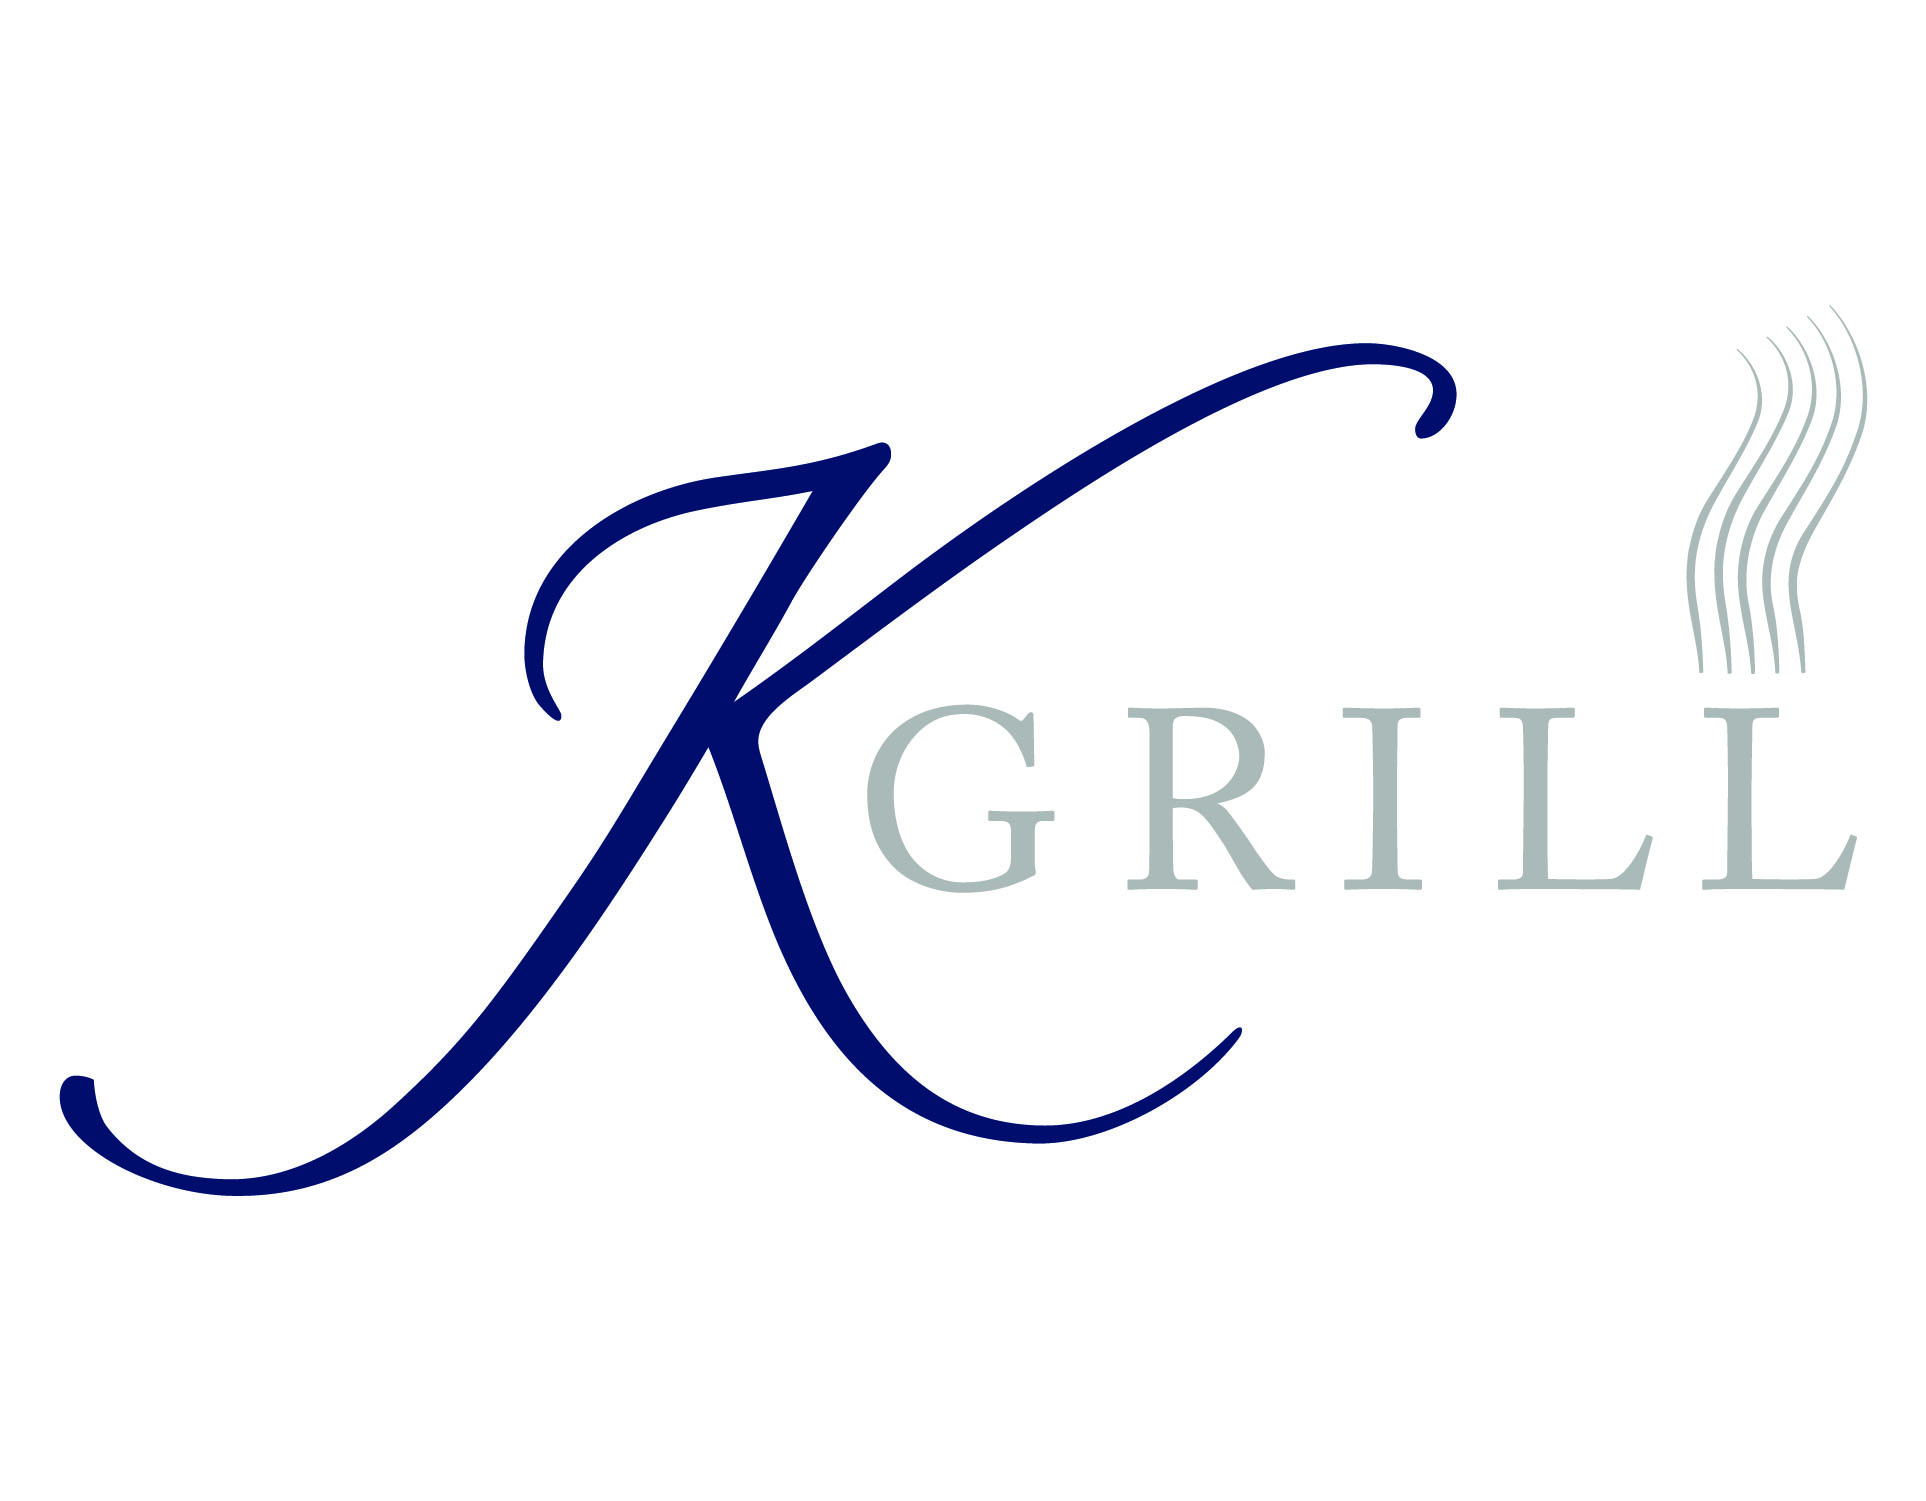 KGrill